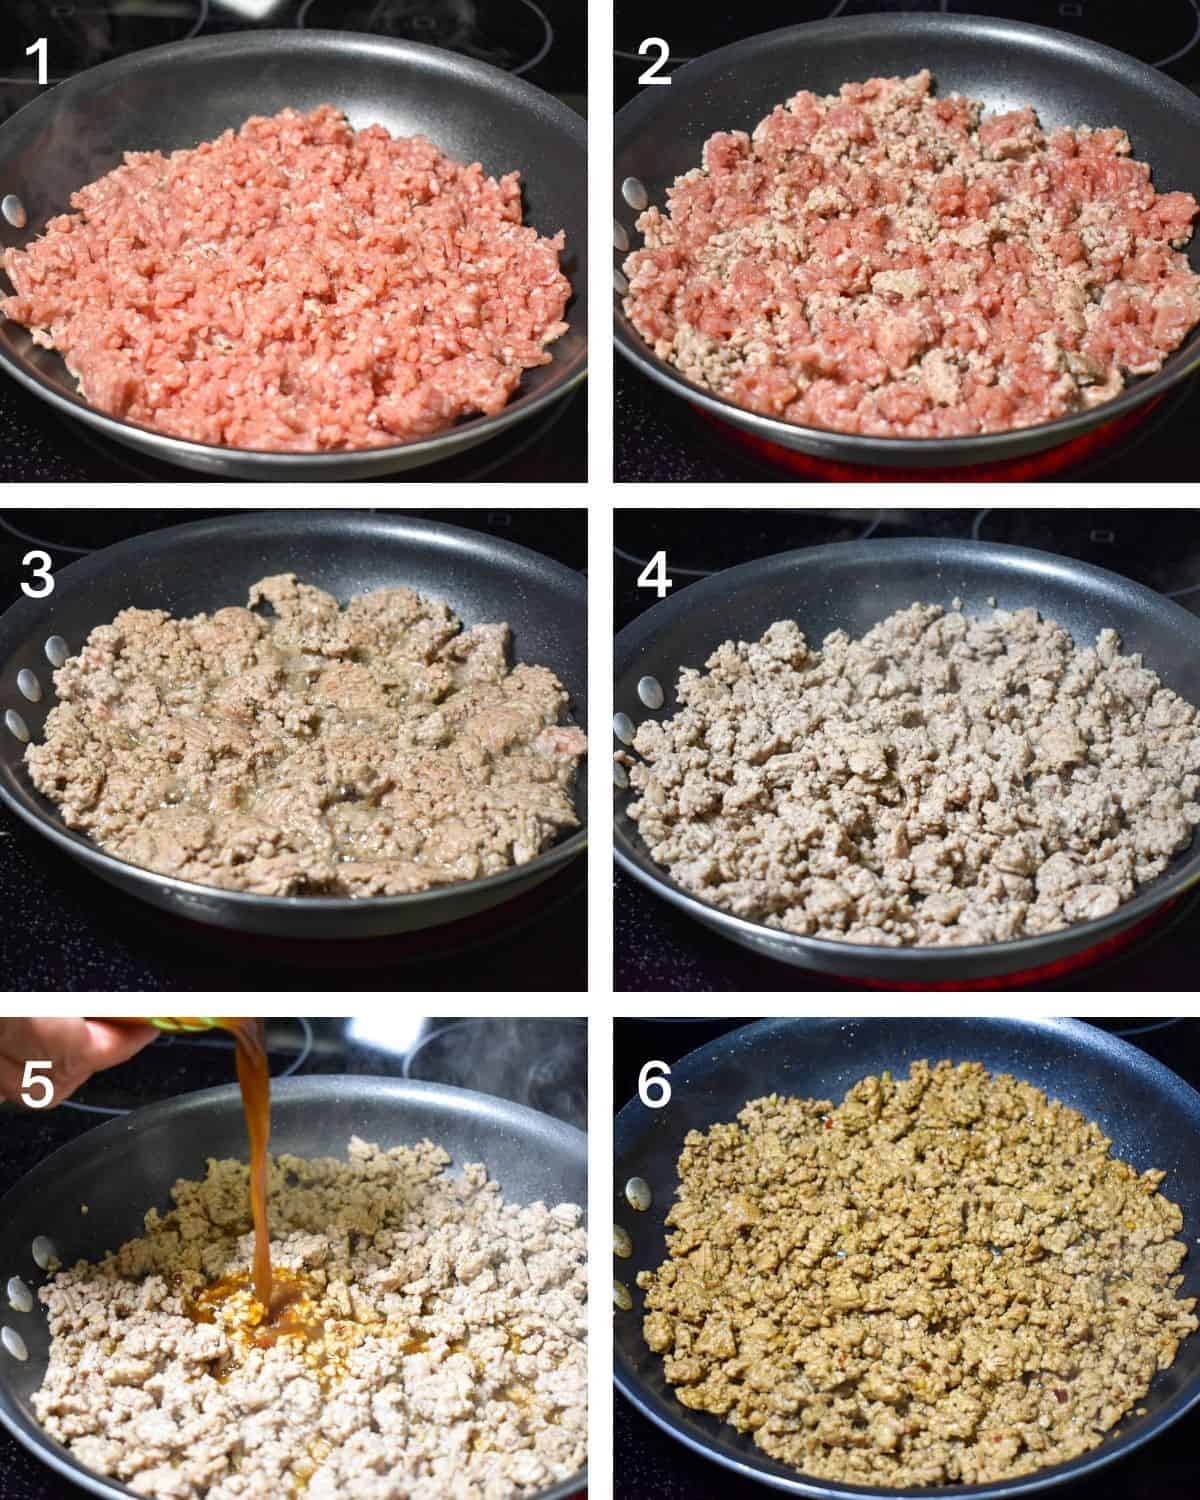 A collage with a picture illustrating the six steps described for cooking the ground pork.